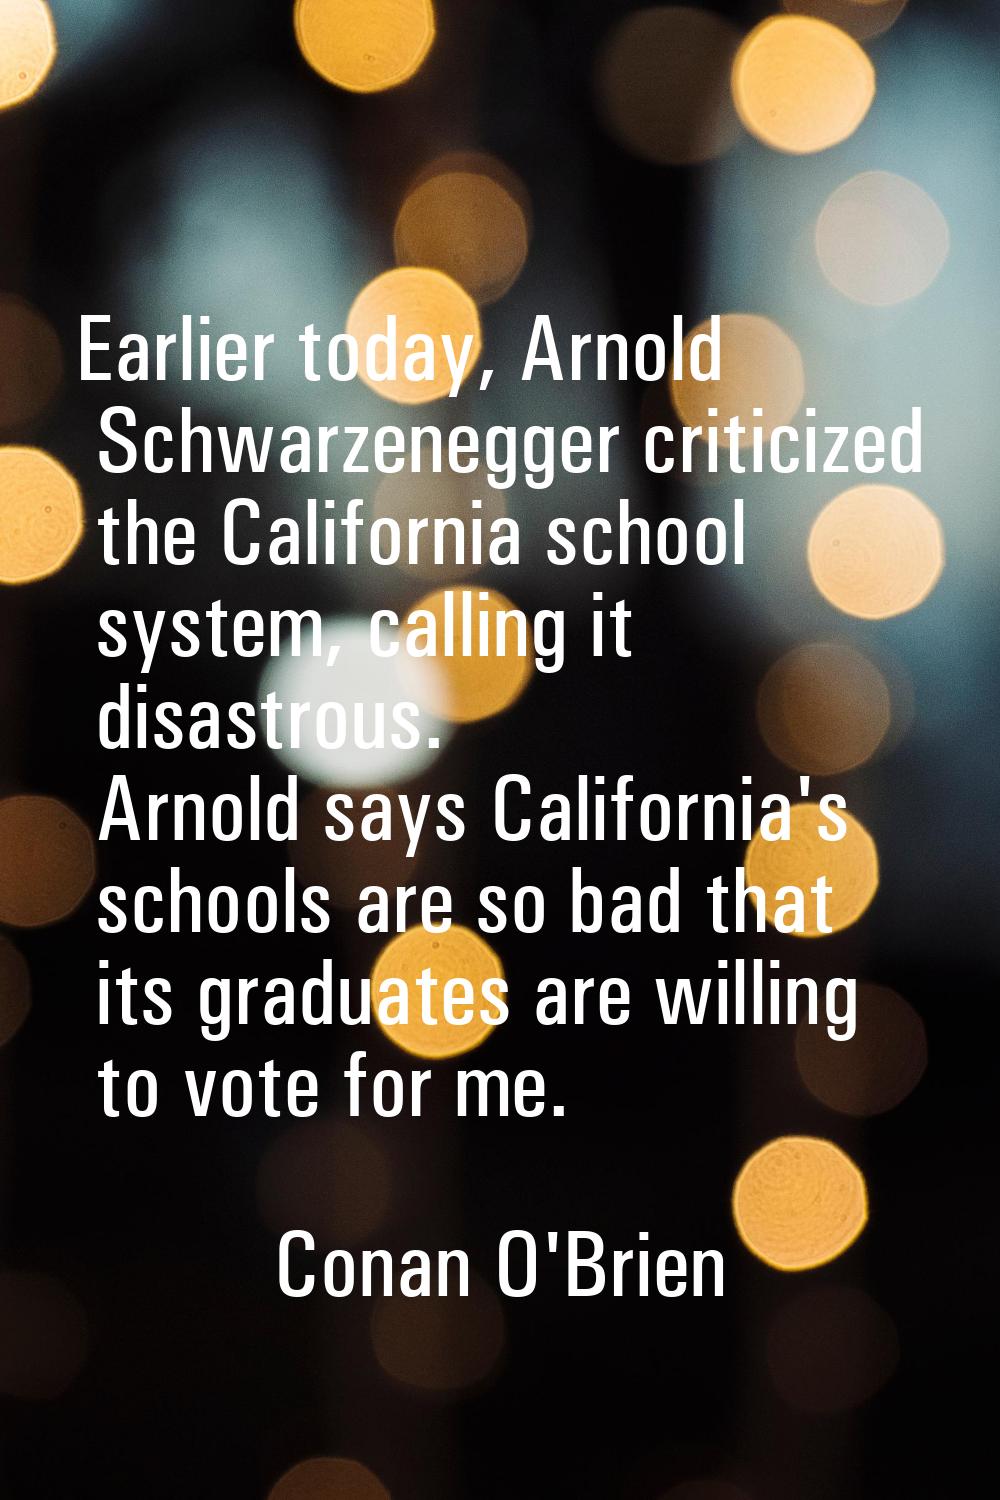 Earlier today, Arnold Schwarzenegger criticized the California school system, calling it disastrous